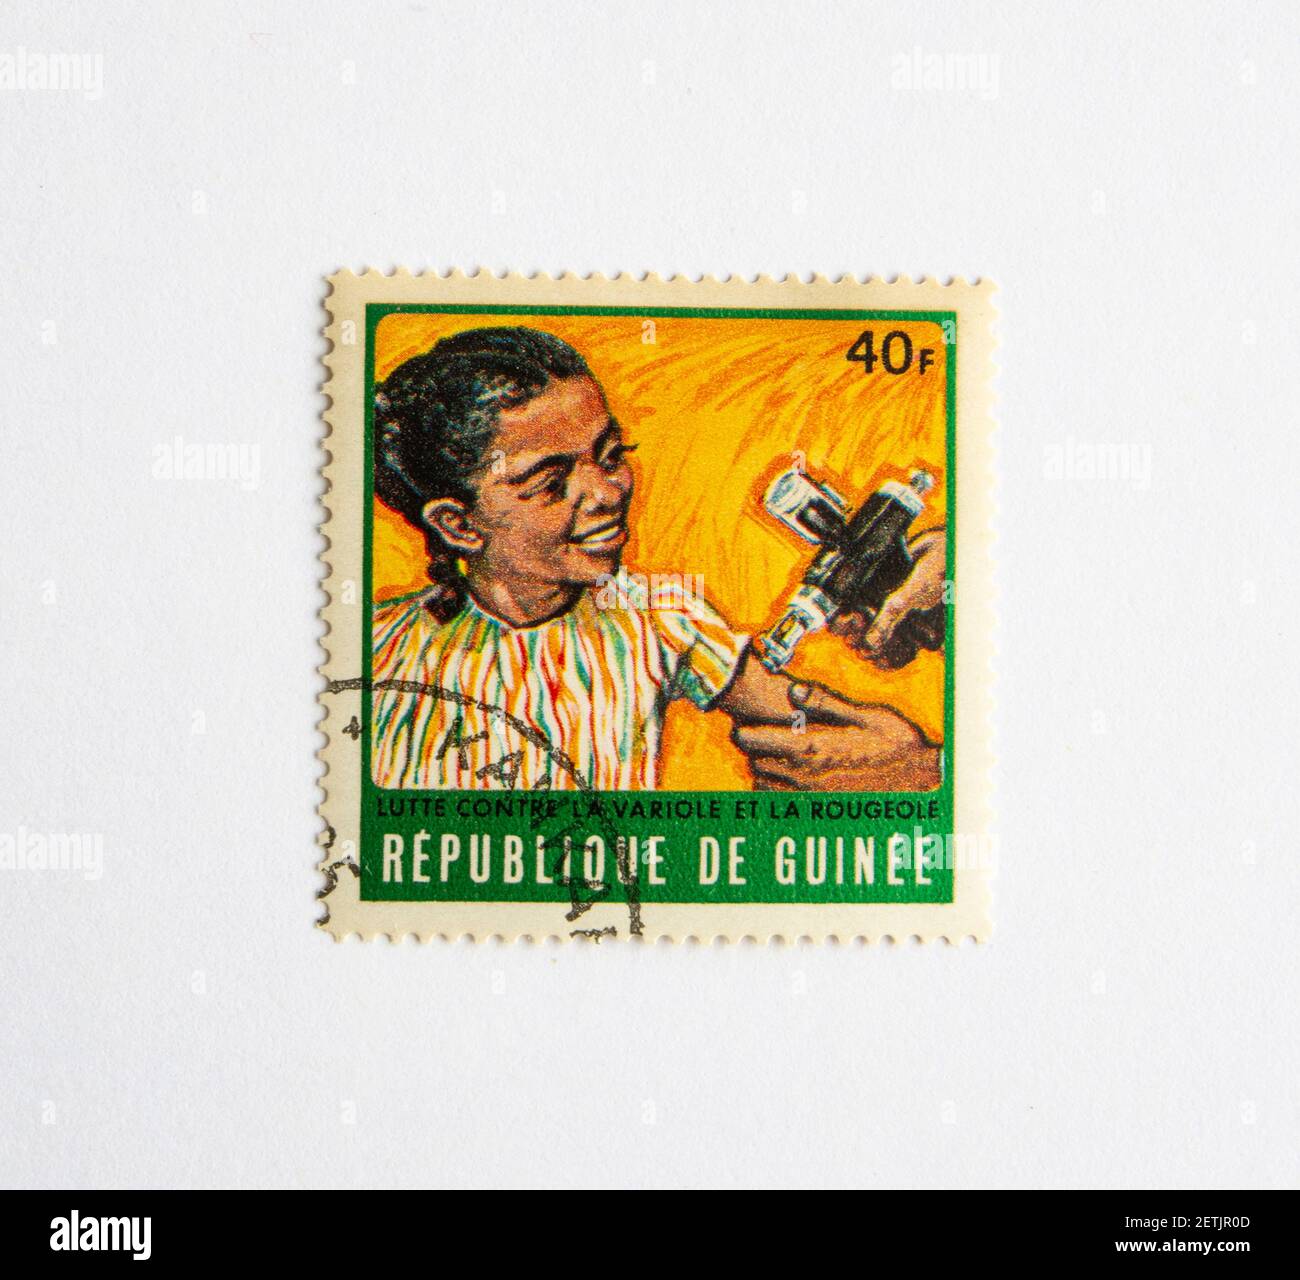 01.03.2021 Istanbul Turkey. Guinea Republic Postage Stamp. circa 1972. The fight for measles and smallpox control. vaccination girl Stock Photo